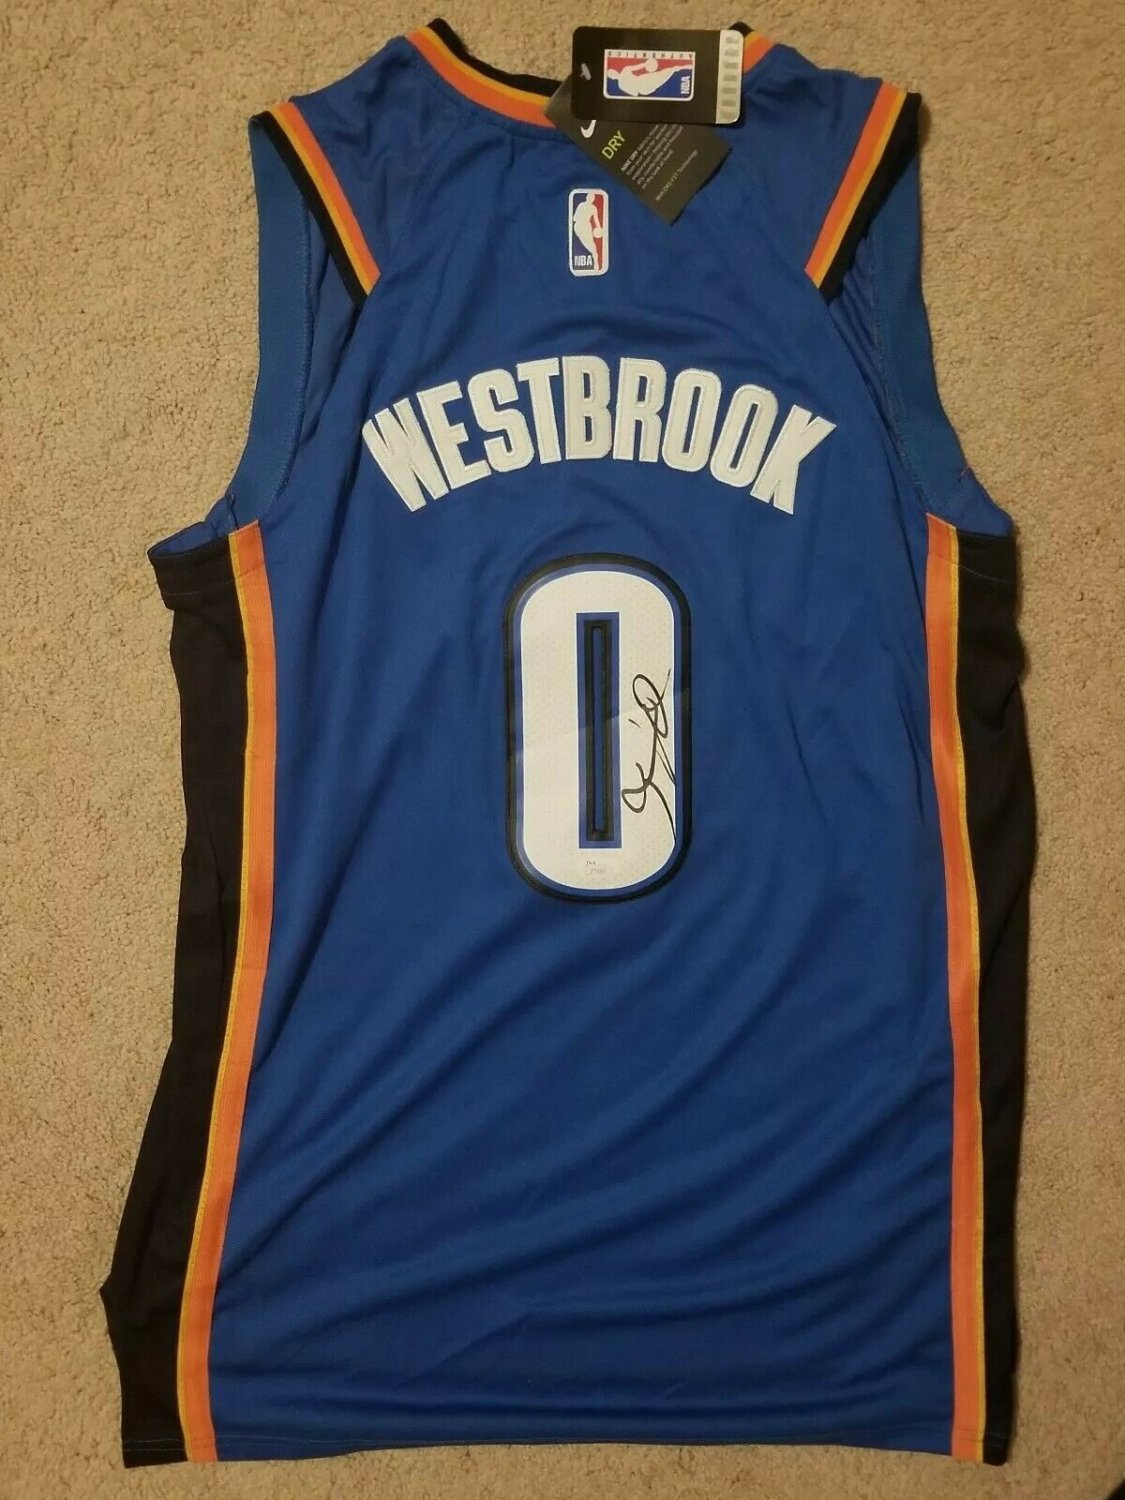 russell westbrook autographed jersey